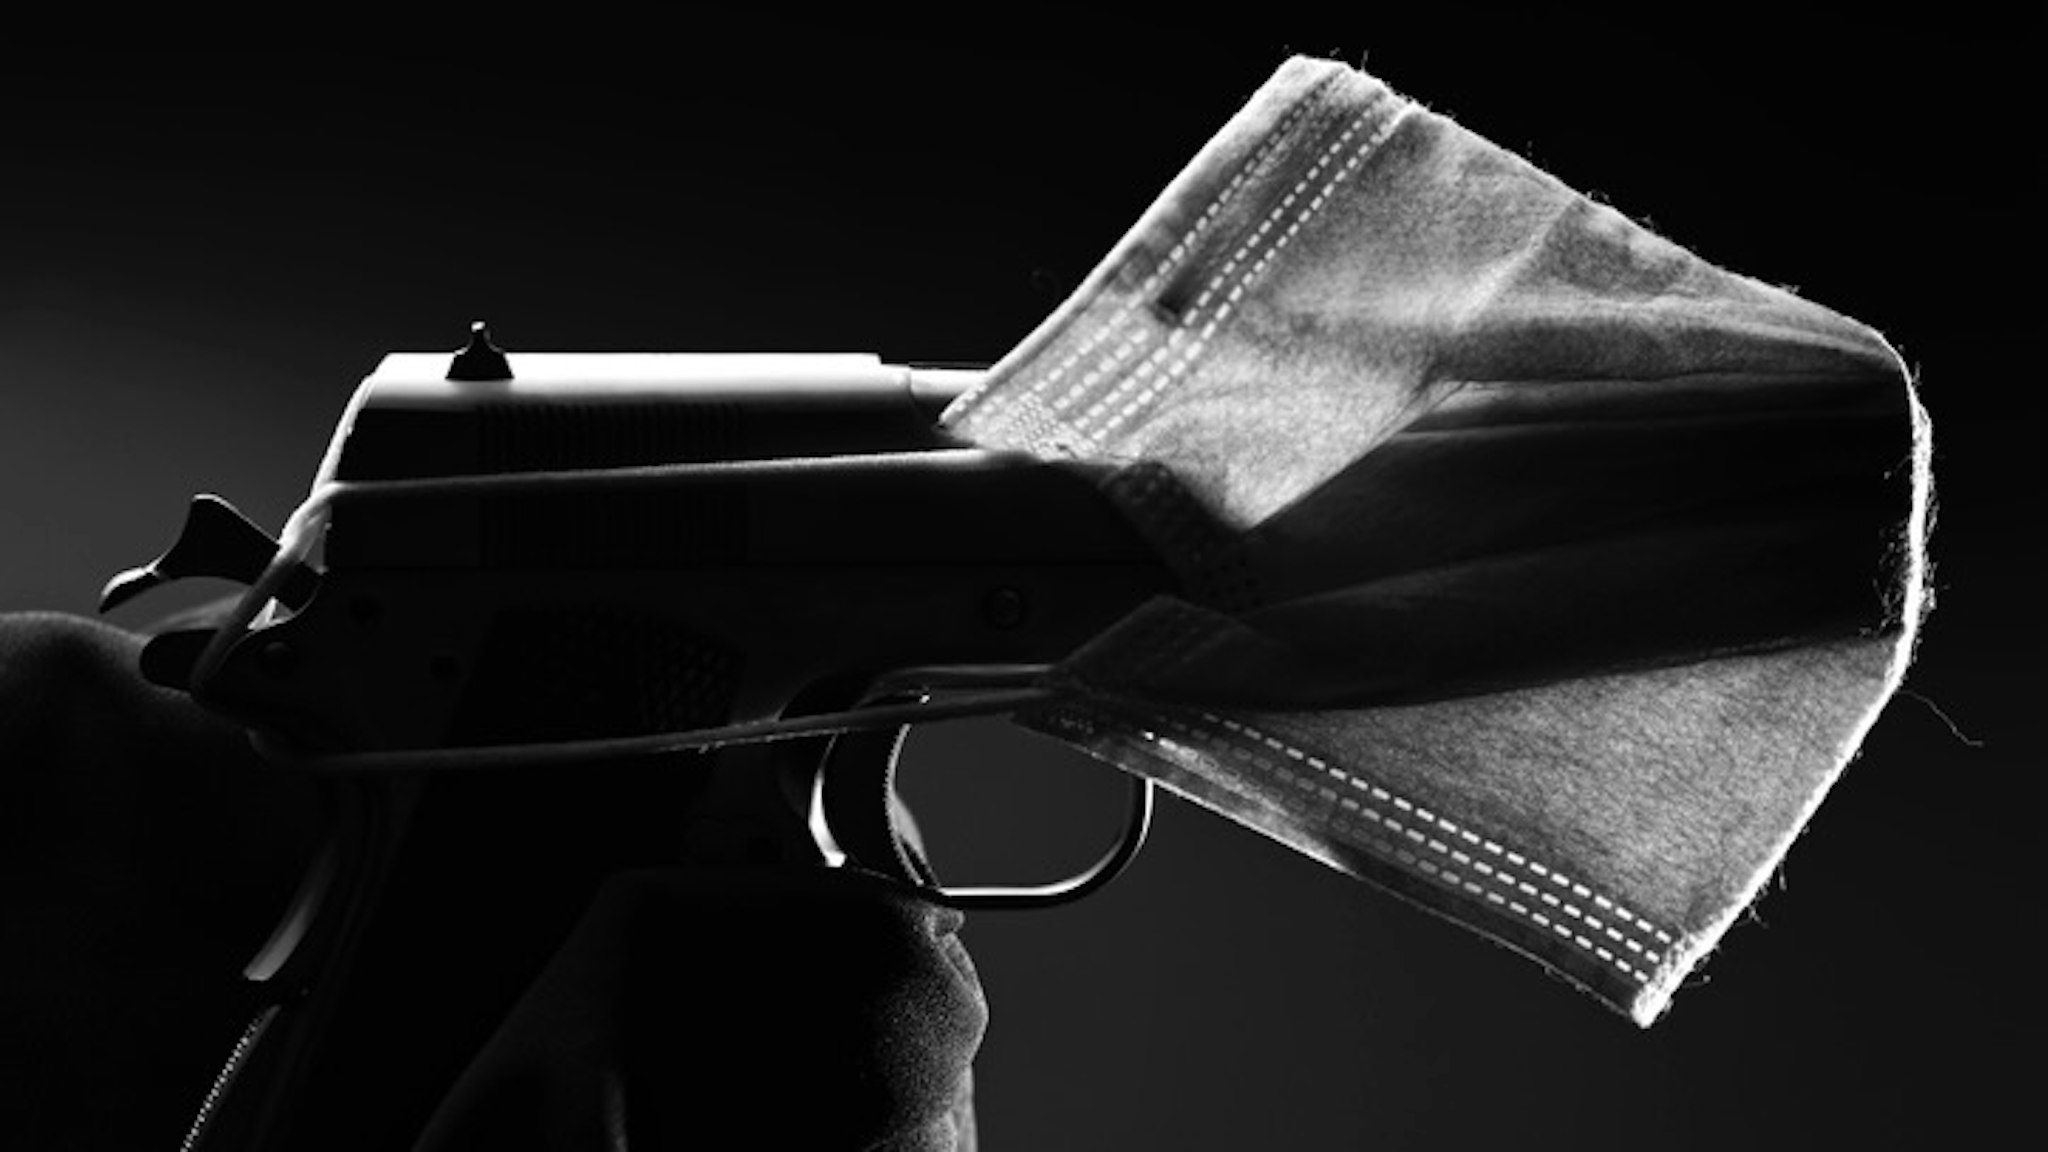 Health weaponized - stock photo A side shot of a face mask covering a gun representing how the current pandemic us being used to further some ambitions Images By Tenyo via Getty Images